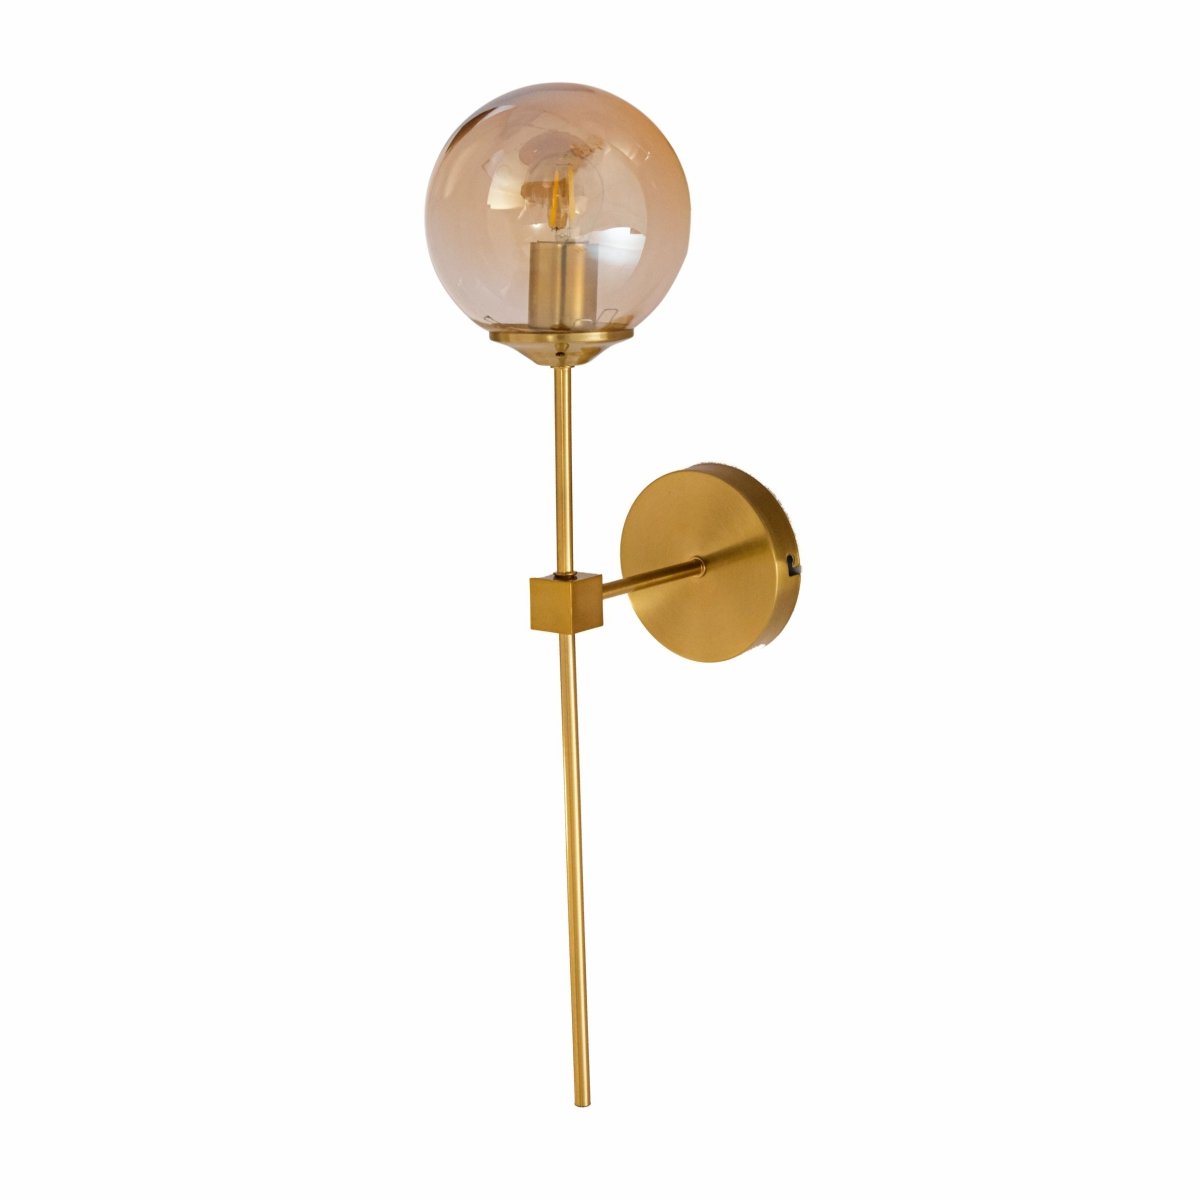 Main image of Amber Glass Gold Metal Wall Light L with E27 Fitting | TEKLED 151-19728